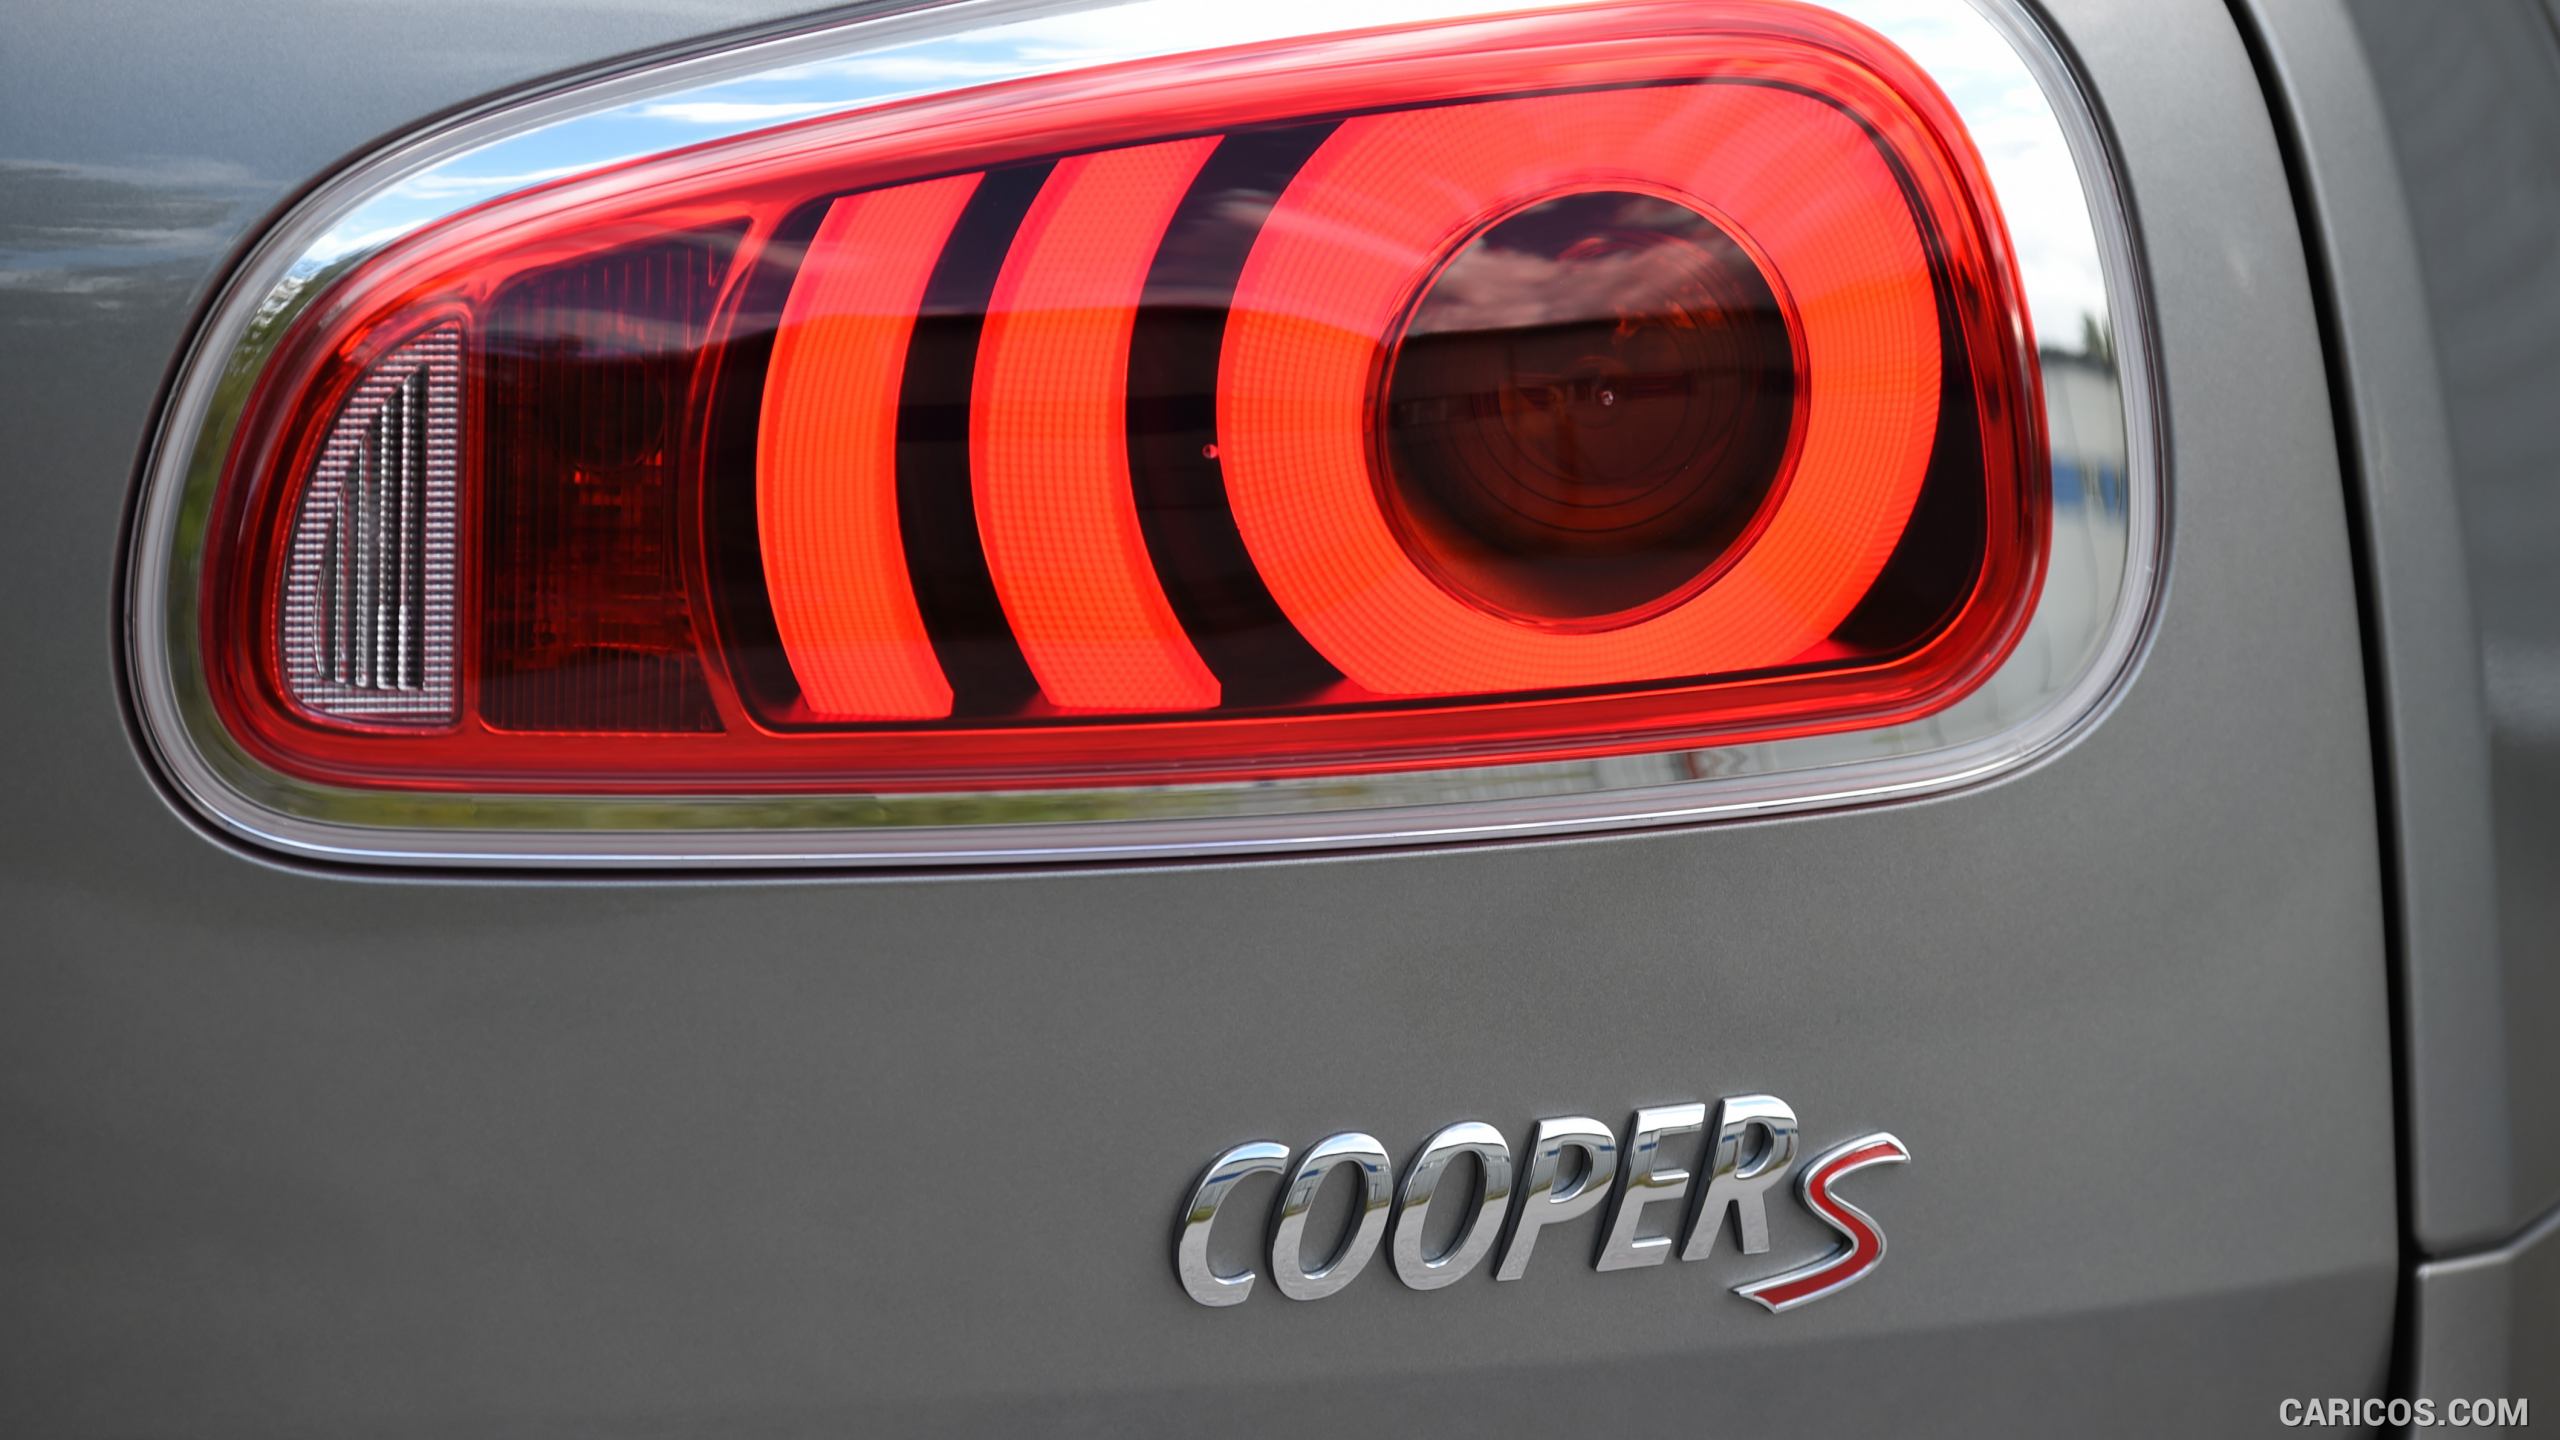 2016 MINI Cooper S Clubman in Metallic Melting Silver - Tail Light, #213 of 380